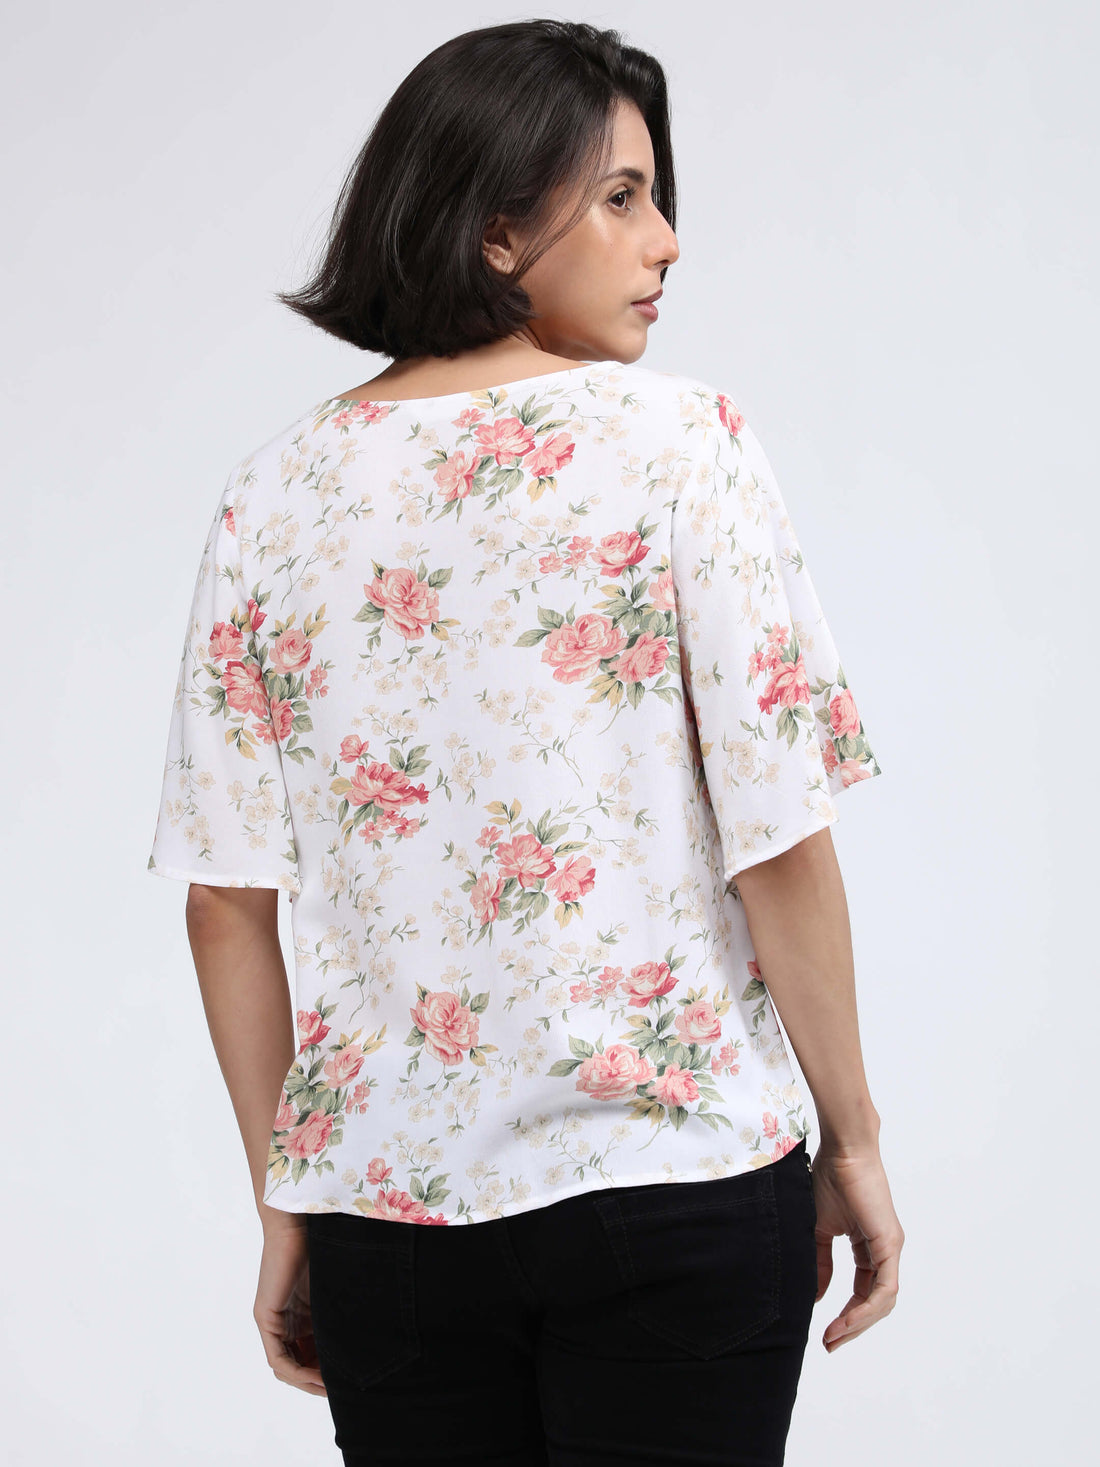 White floral top